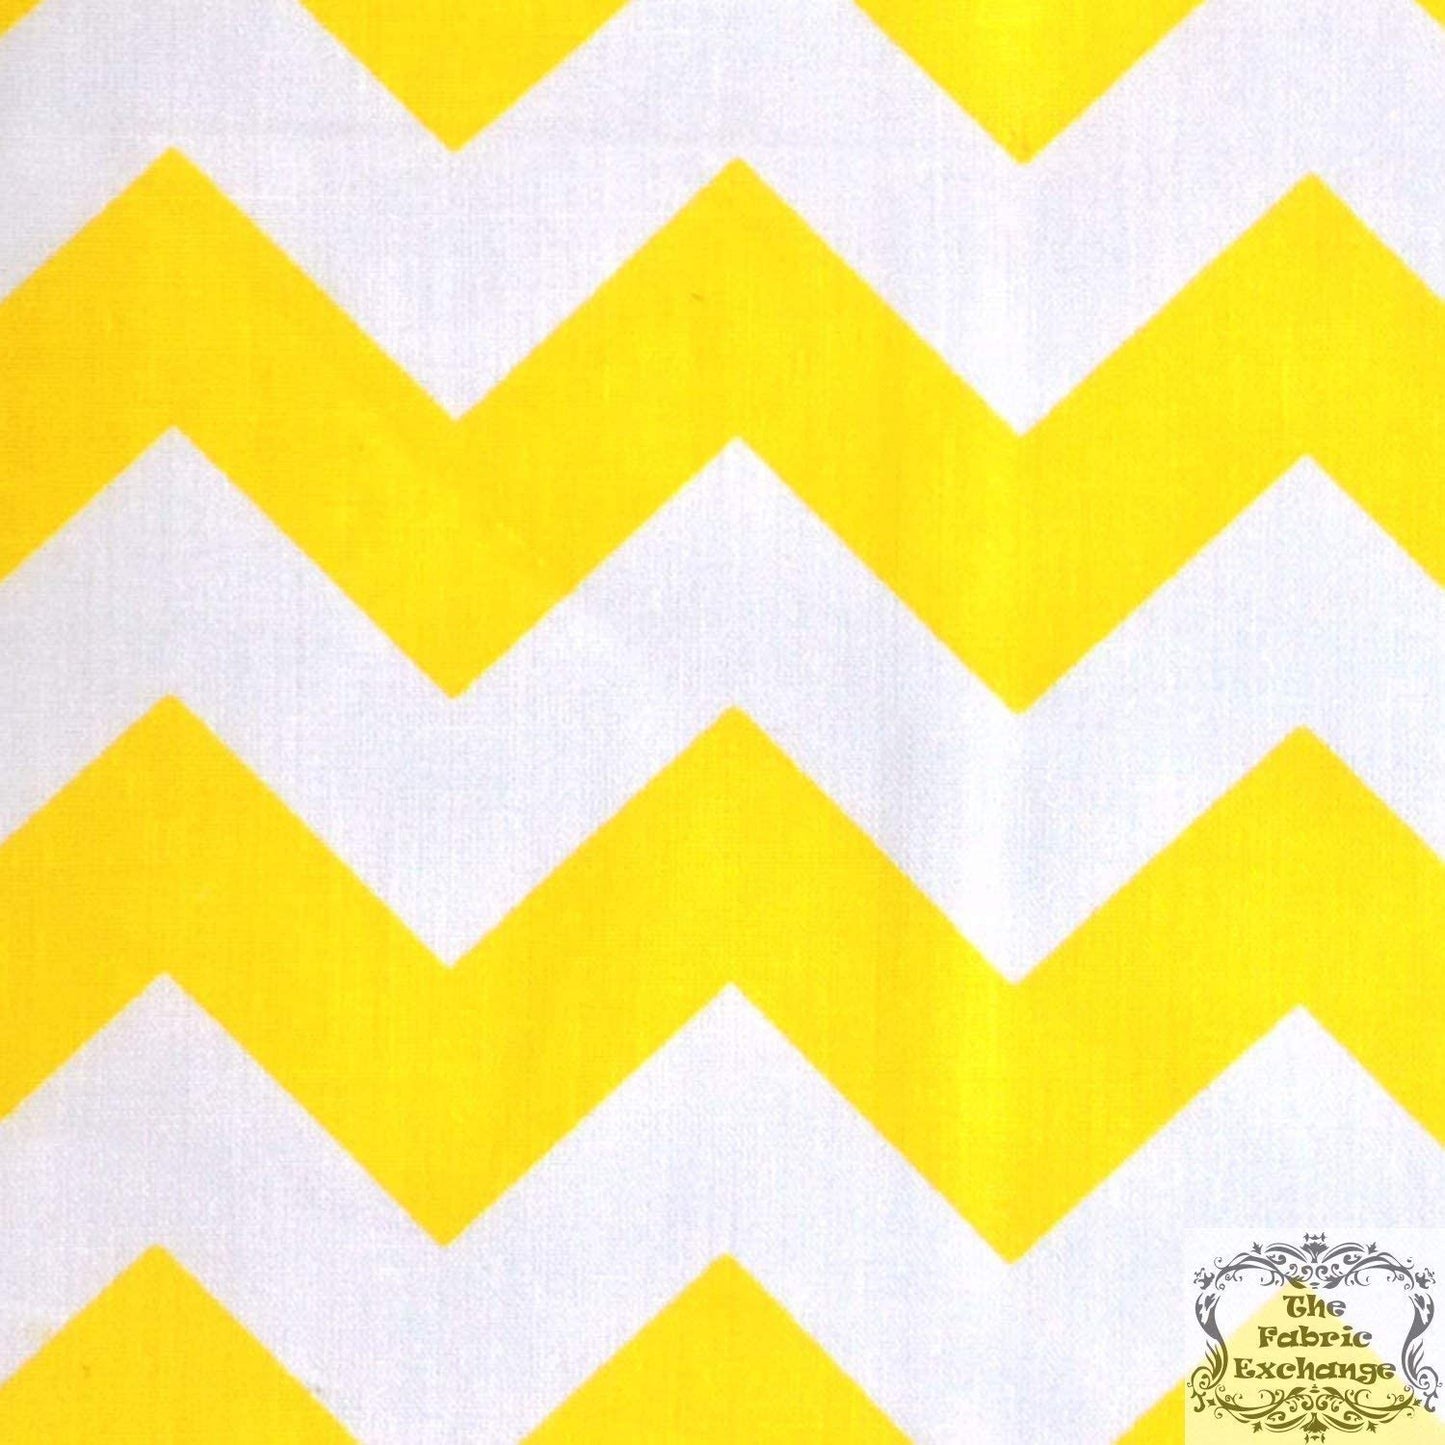 60" Wide by 1" Chevron Poly Cotton Fabric (White & Yellow, by The Yard)